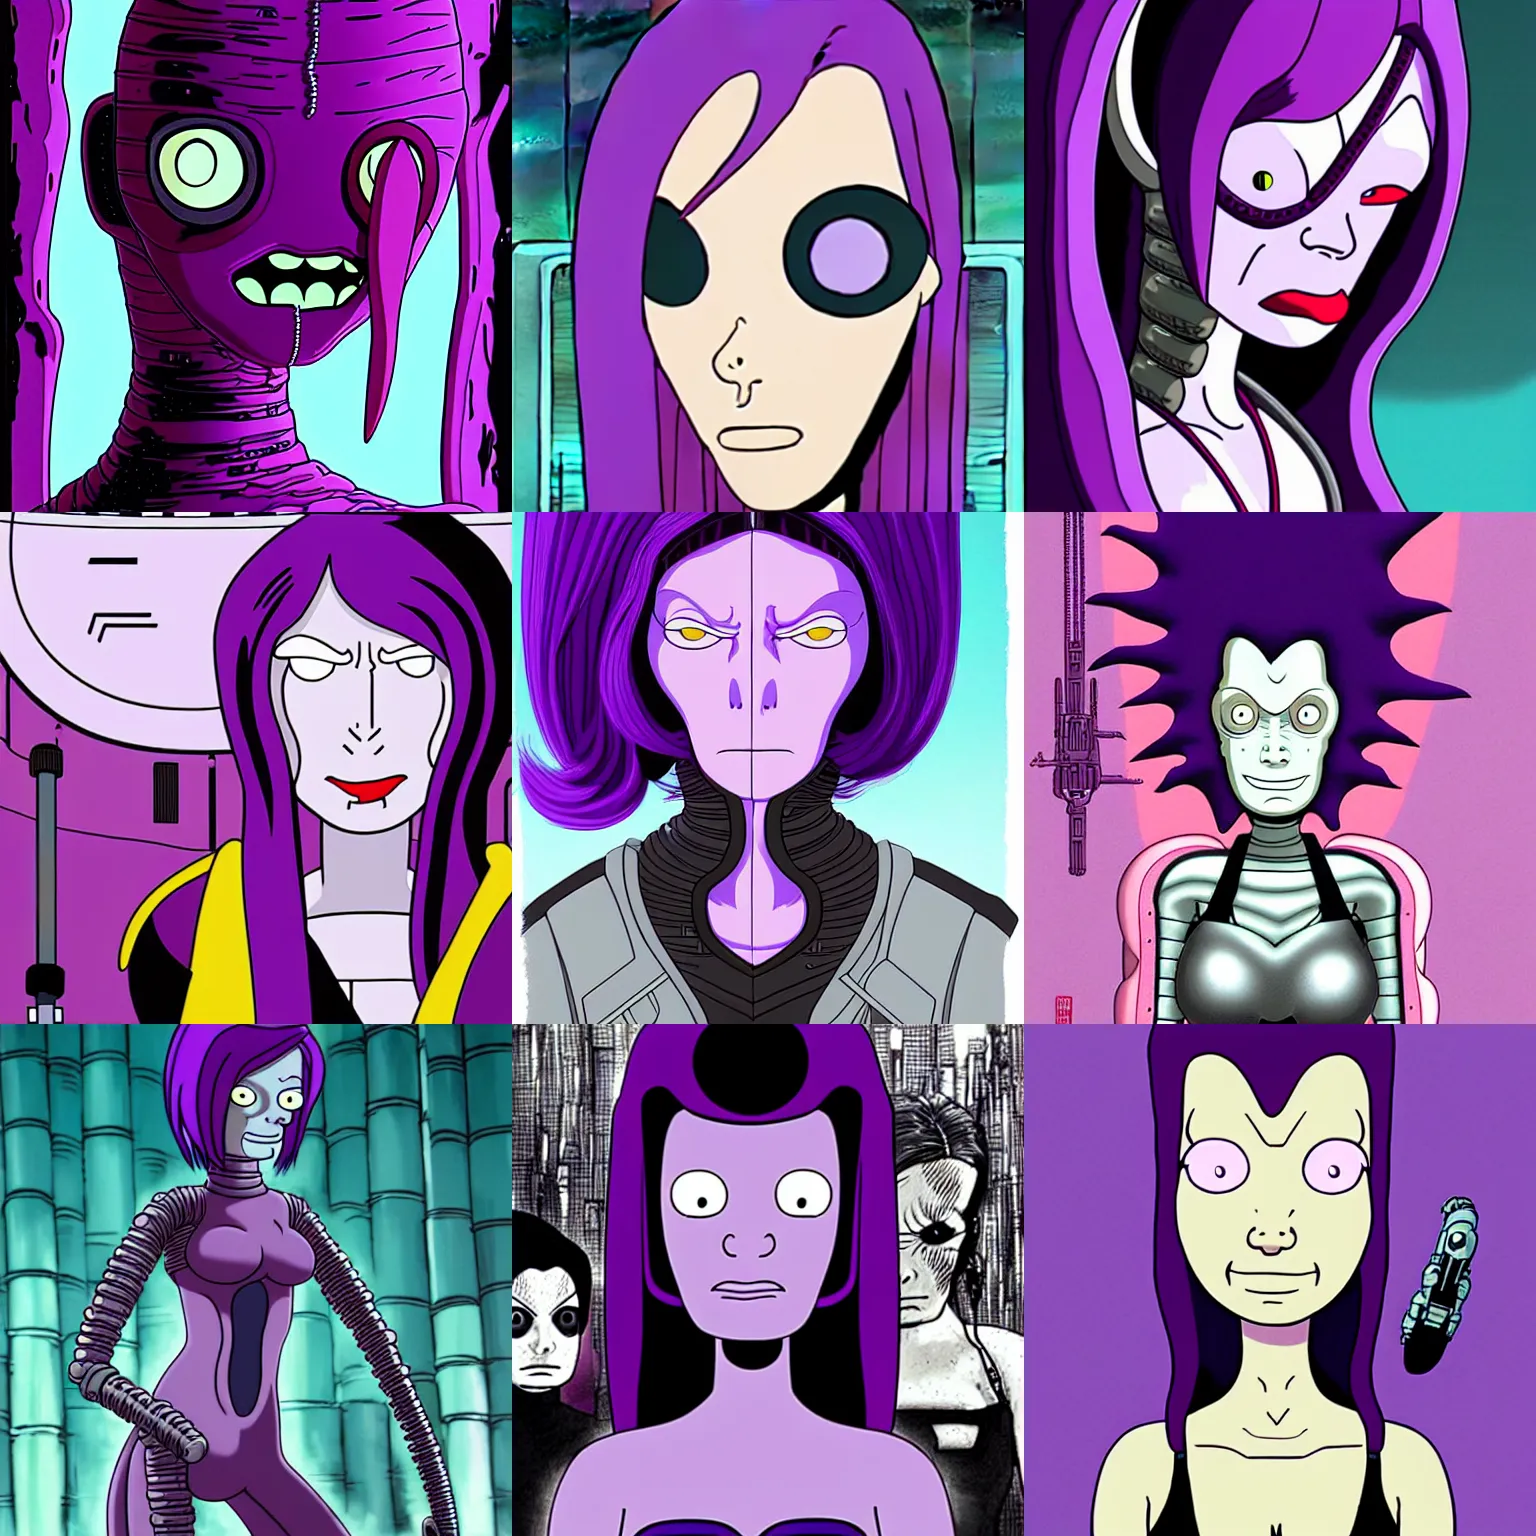 Prompt: portrait leela from futurama in futuristic city, one eye on the face, purple hair, by tsutomu nihei, by h. r. giger